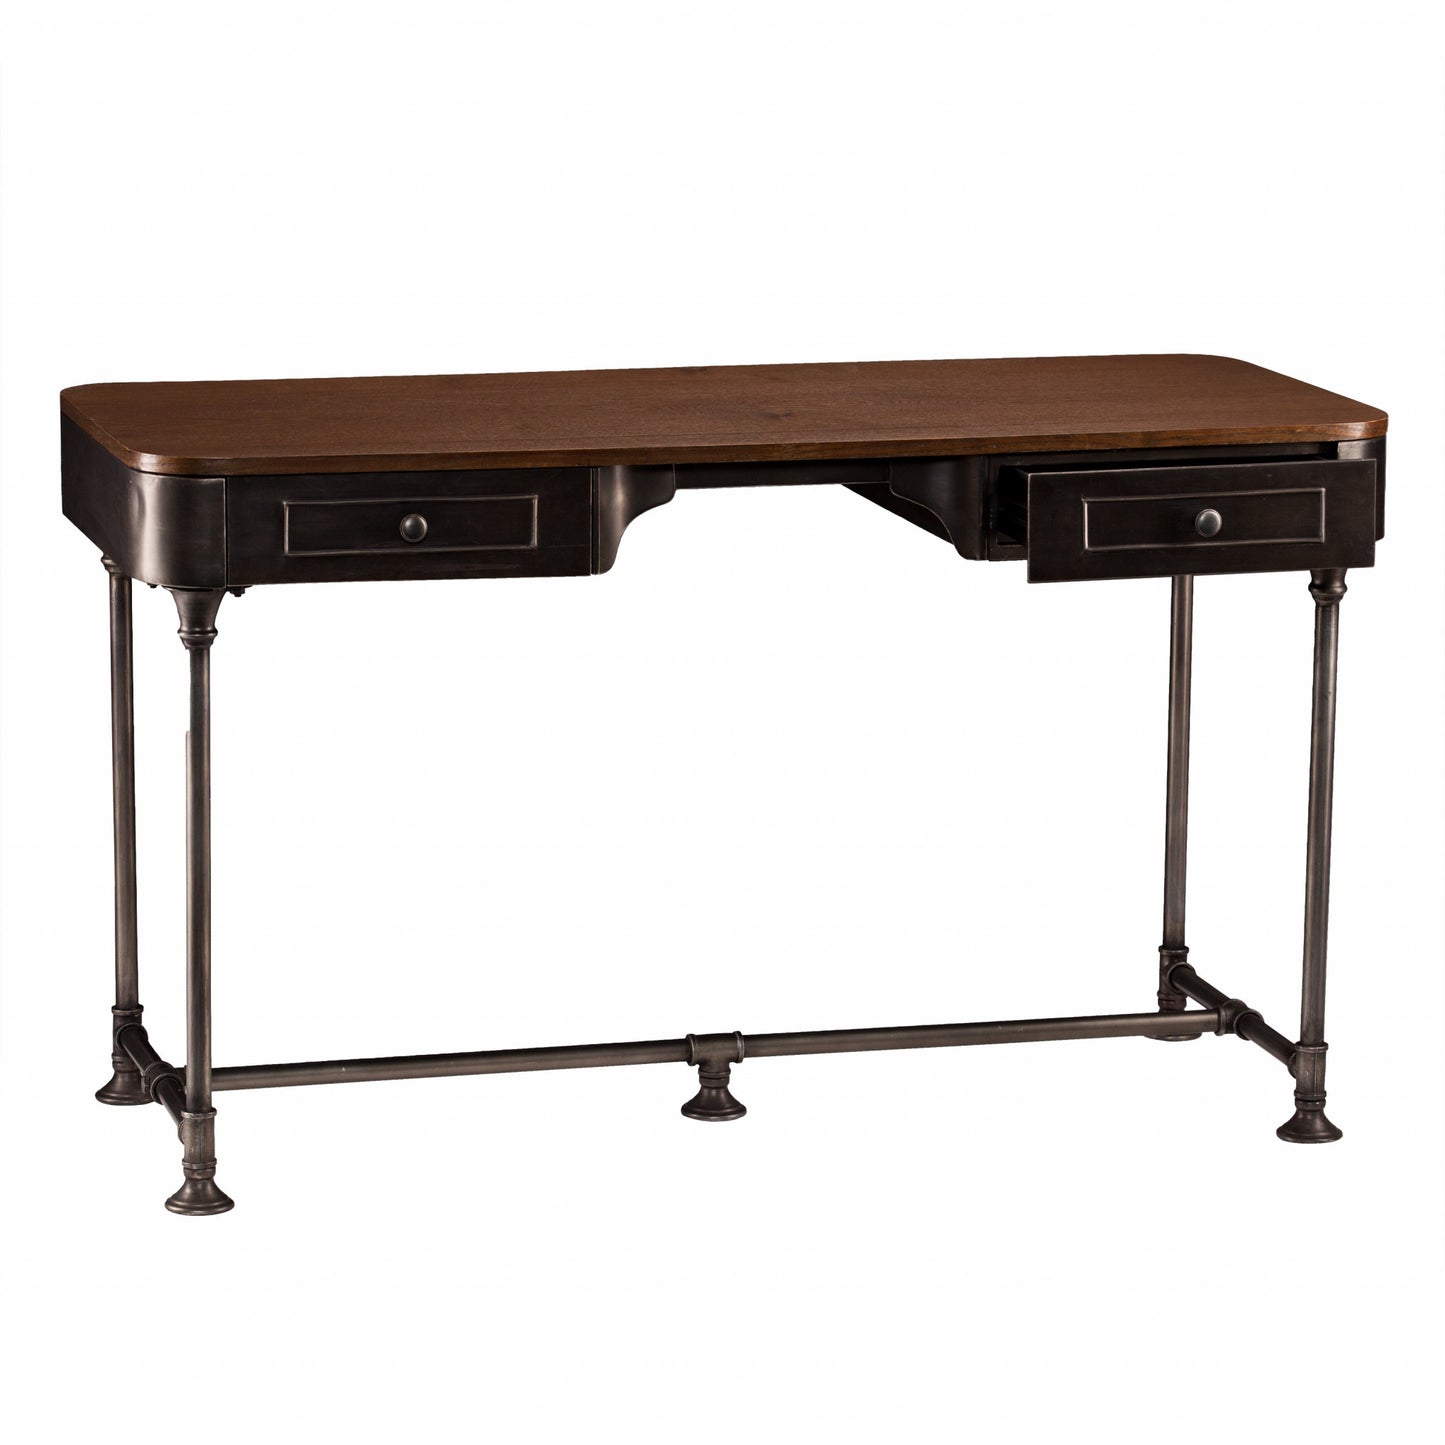 50" Brown And Silver Writing Desk With Two Drawers